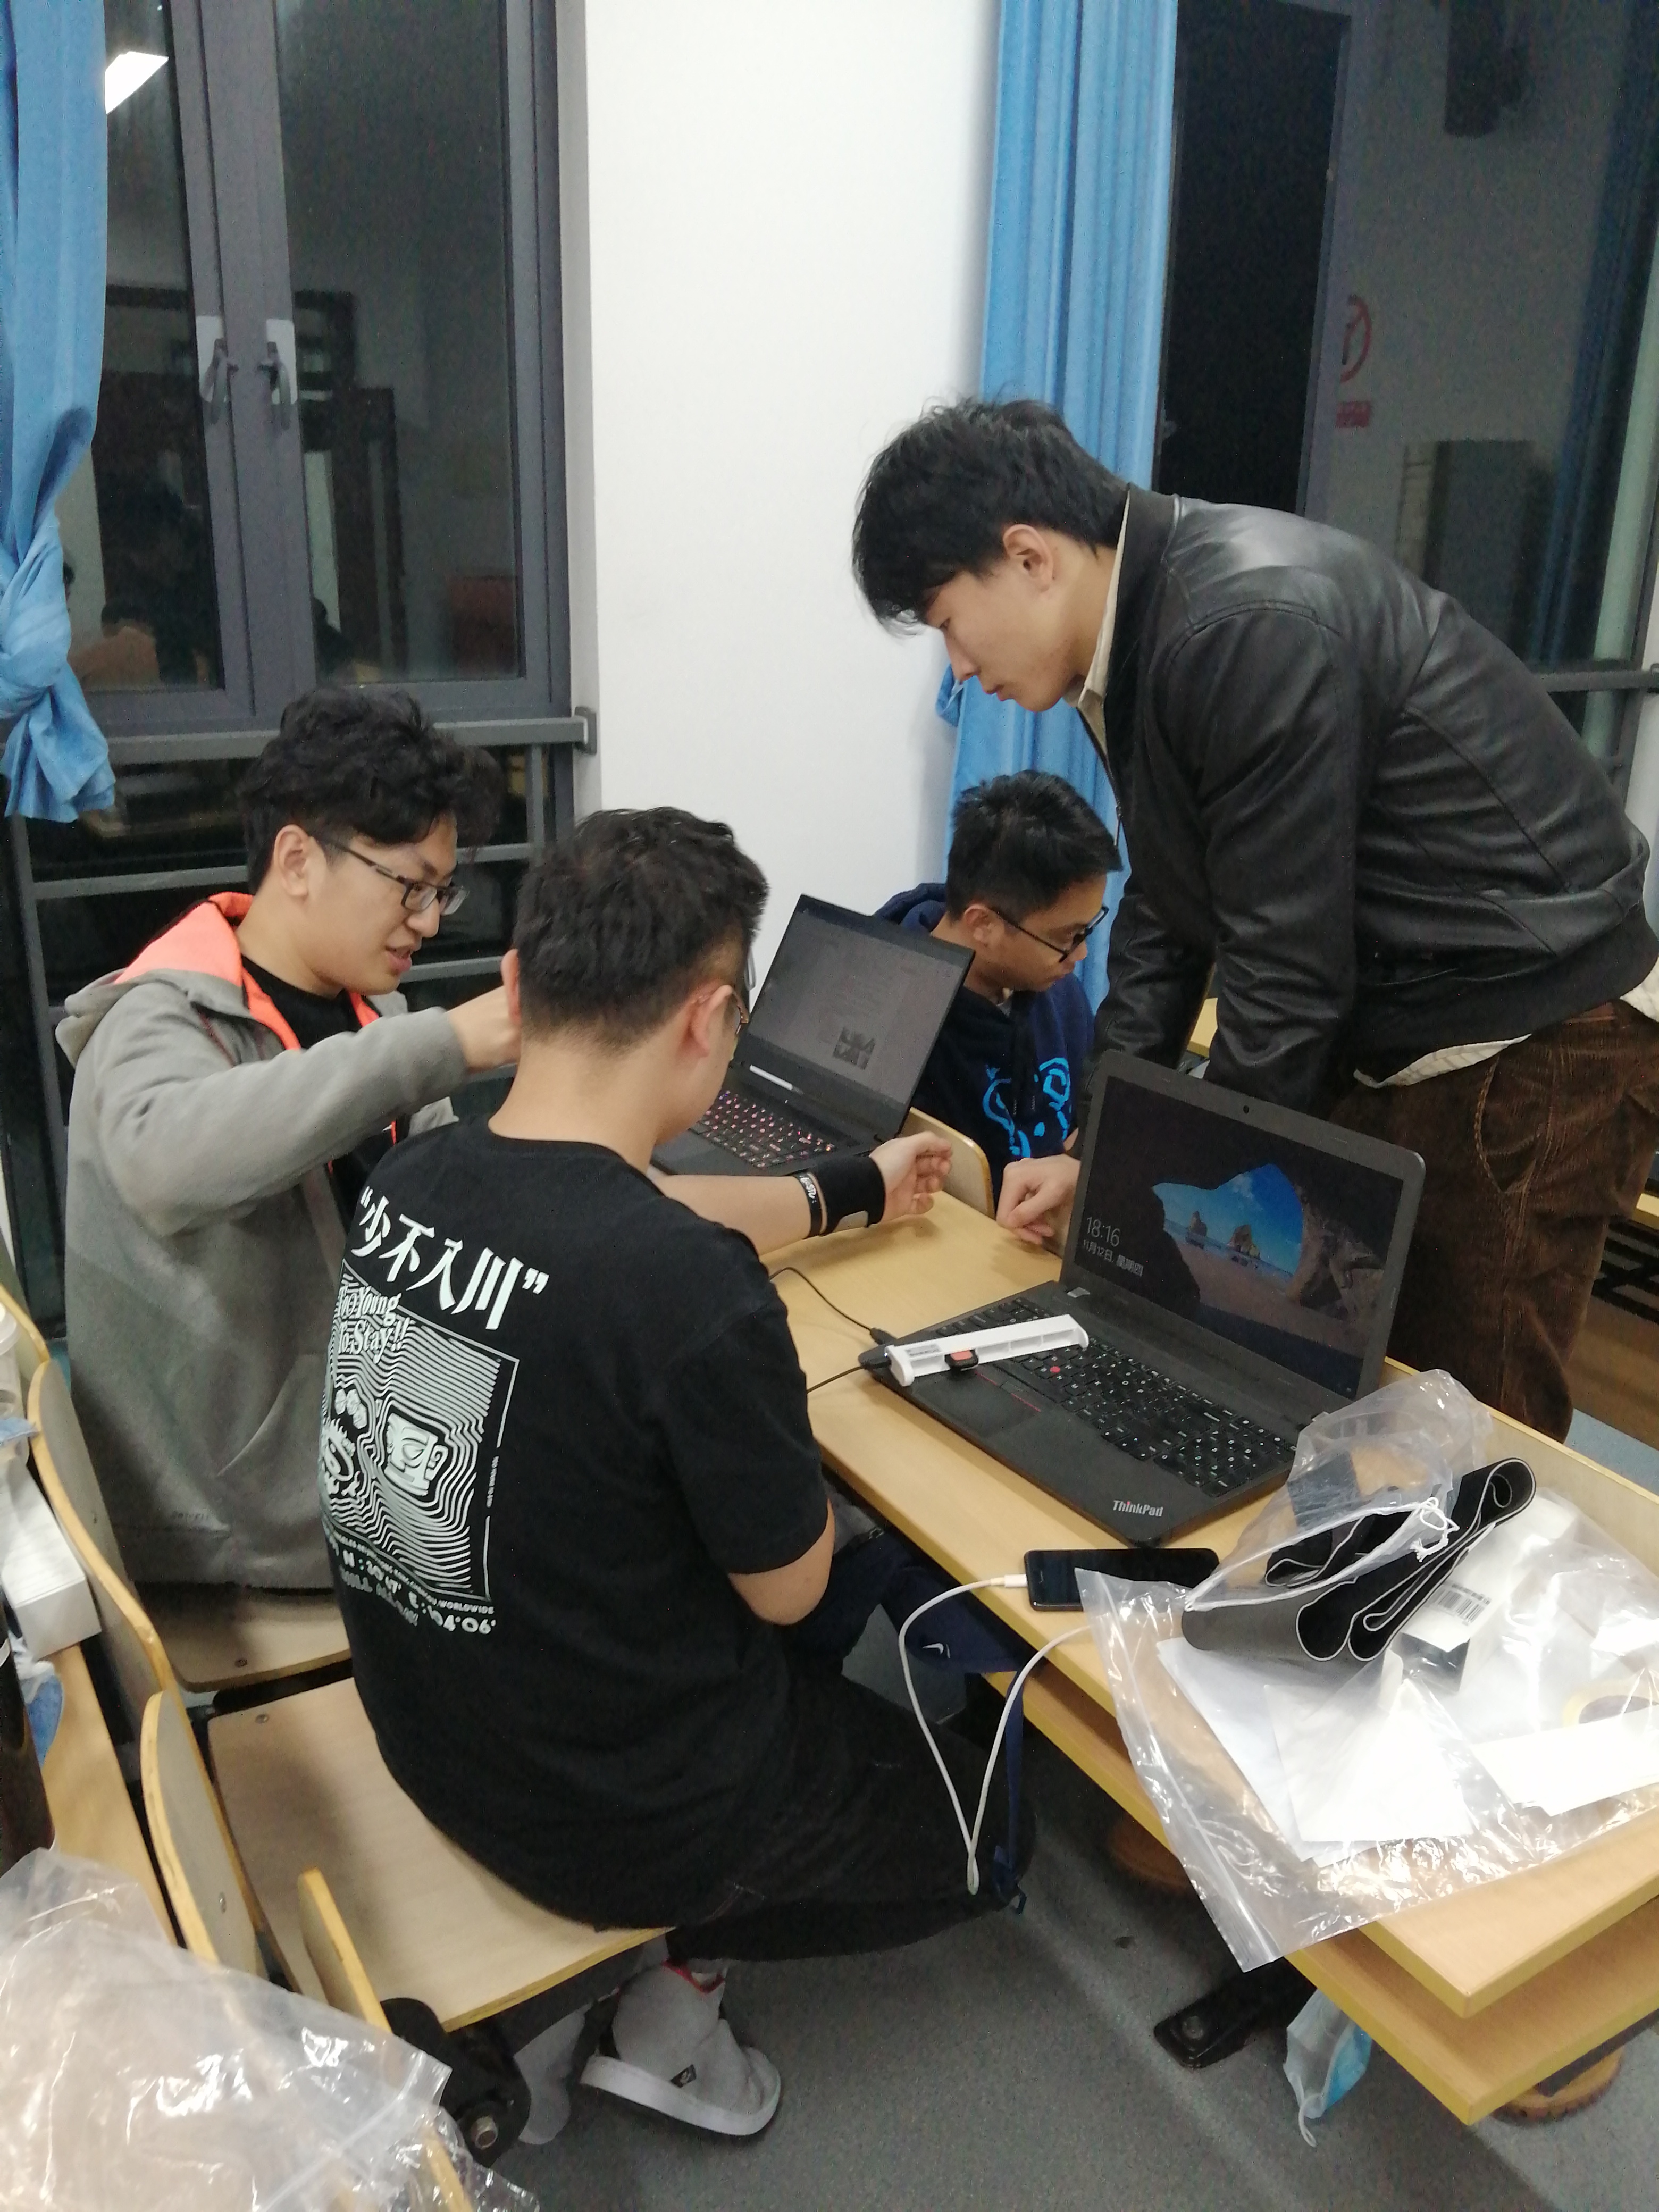 Getting hands-on with wearable sensors at Shanghai Jiao Tong University